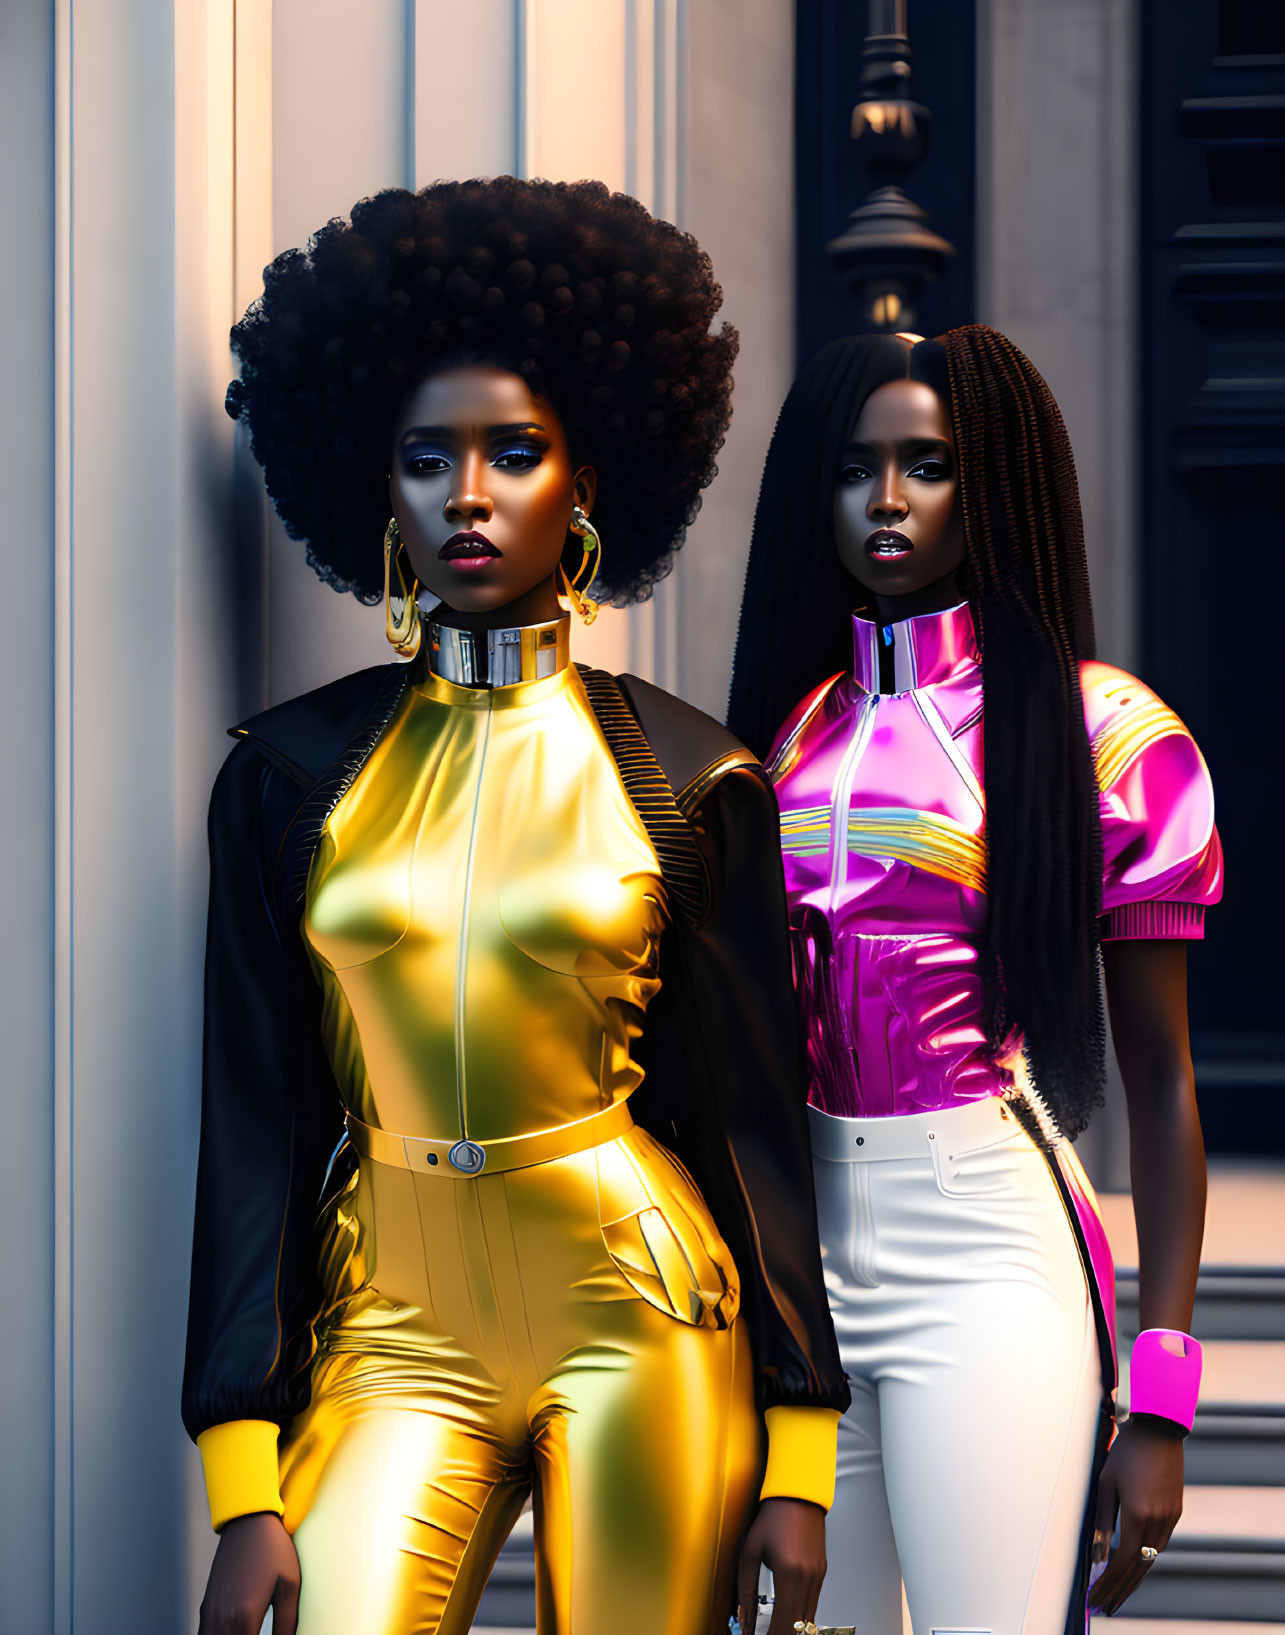 Two women with bold afro hairstyles in futuristic outfits posing in front of a classical building.